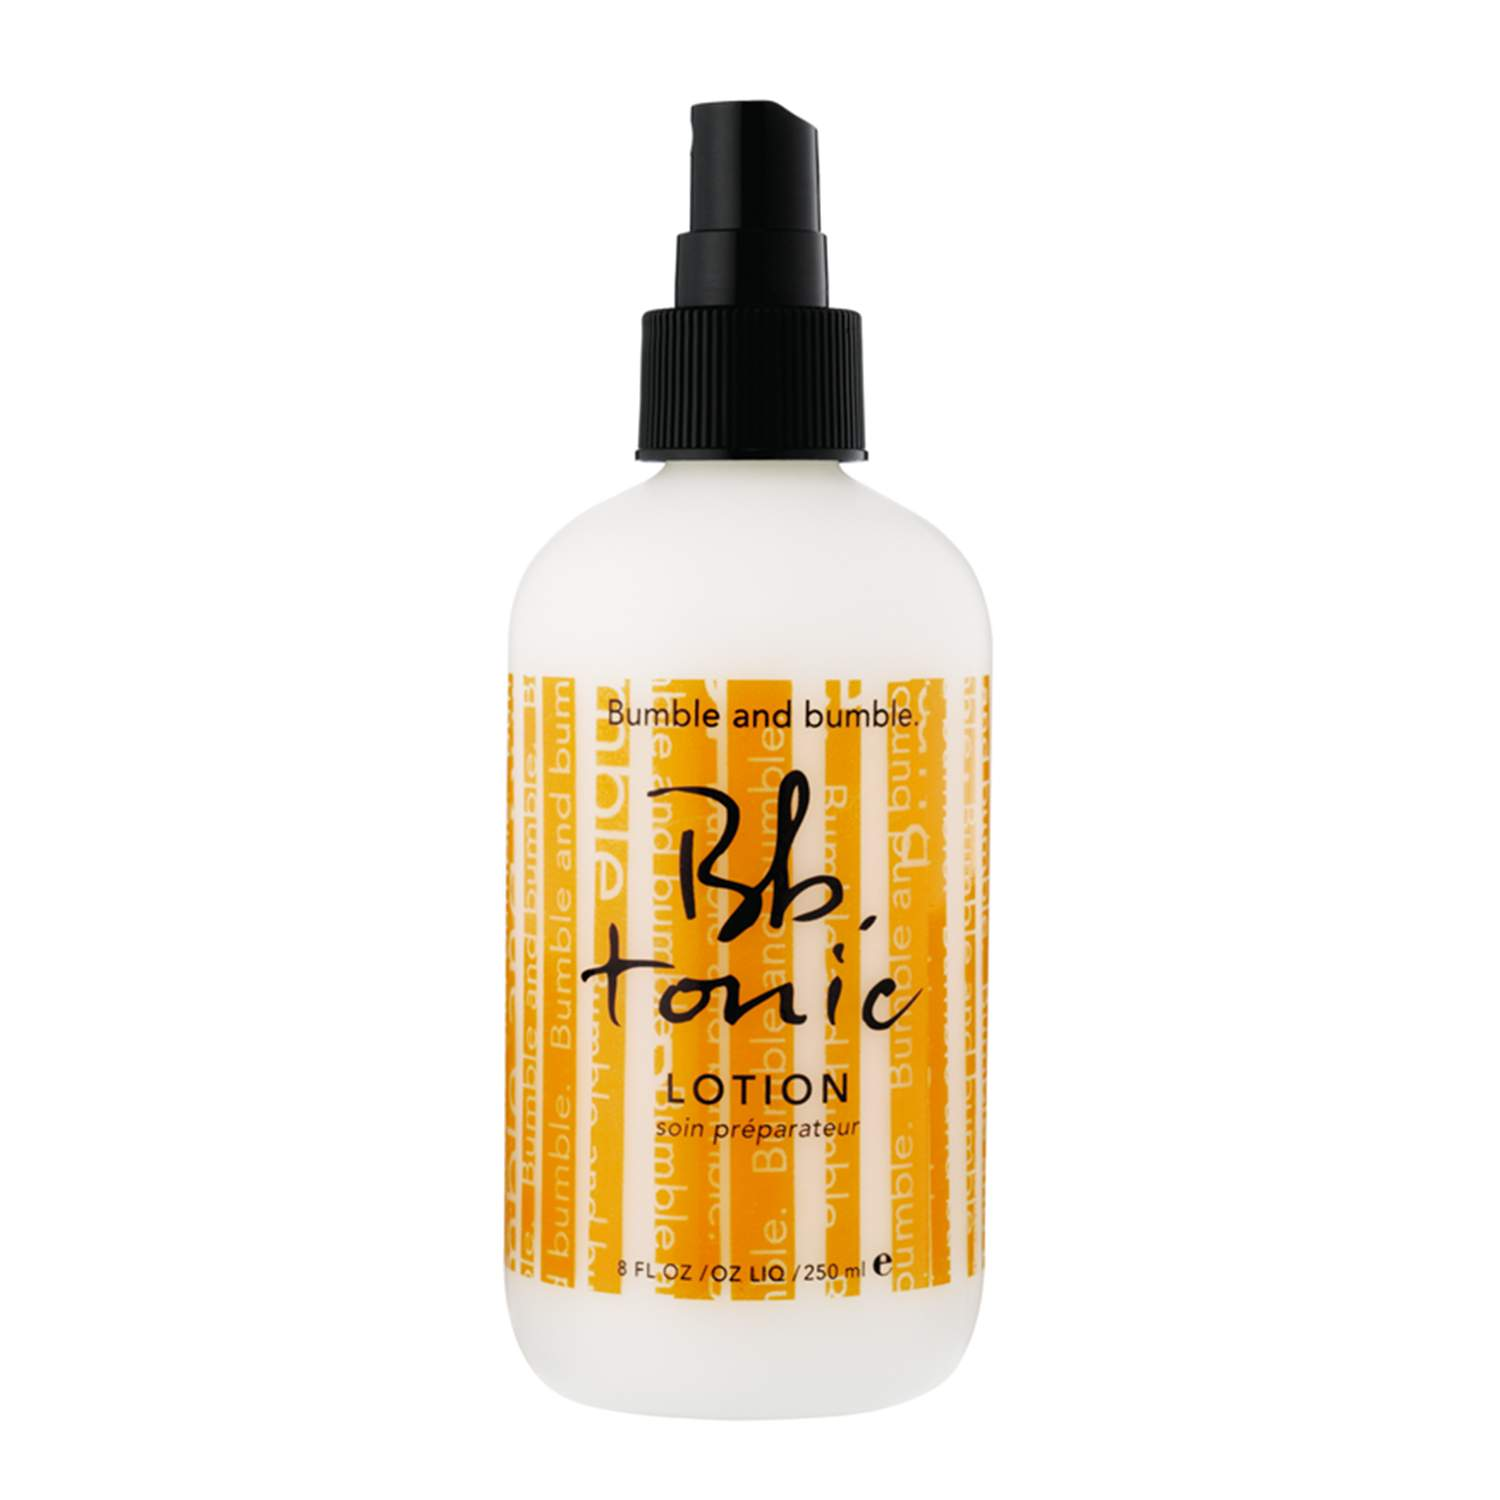 Bumble and bumble. Tonic Lotion  1